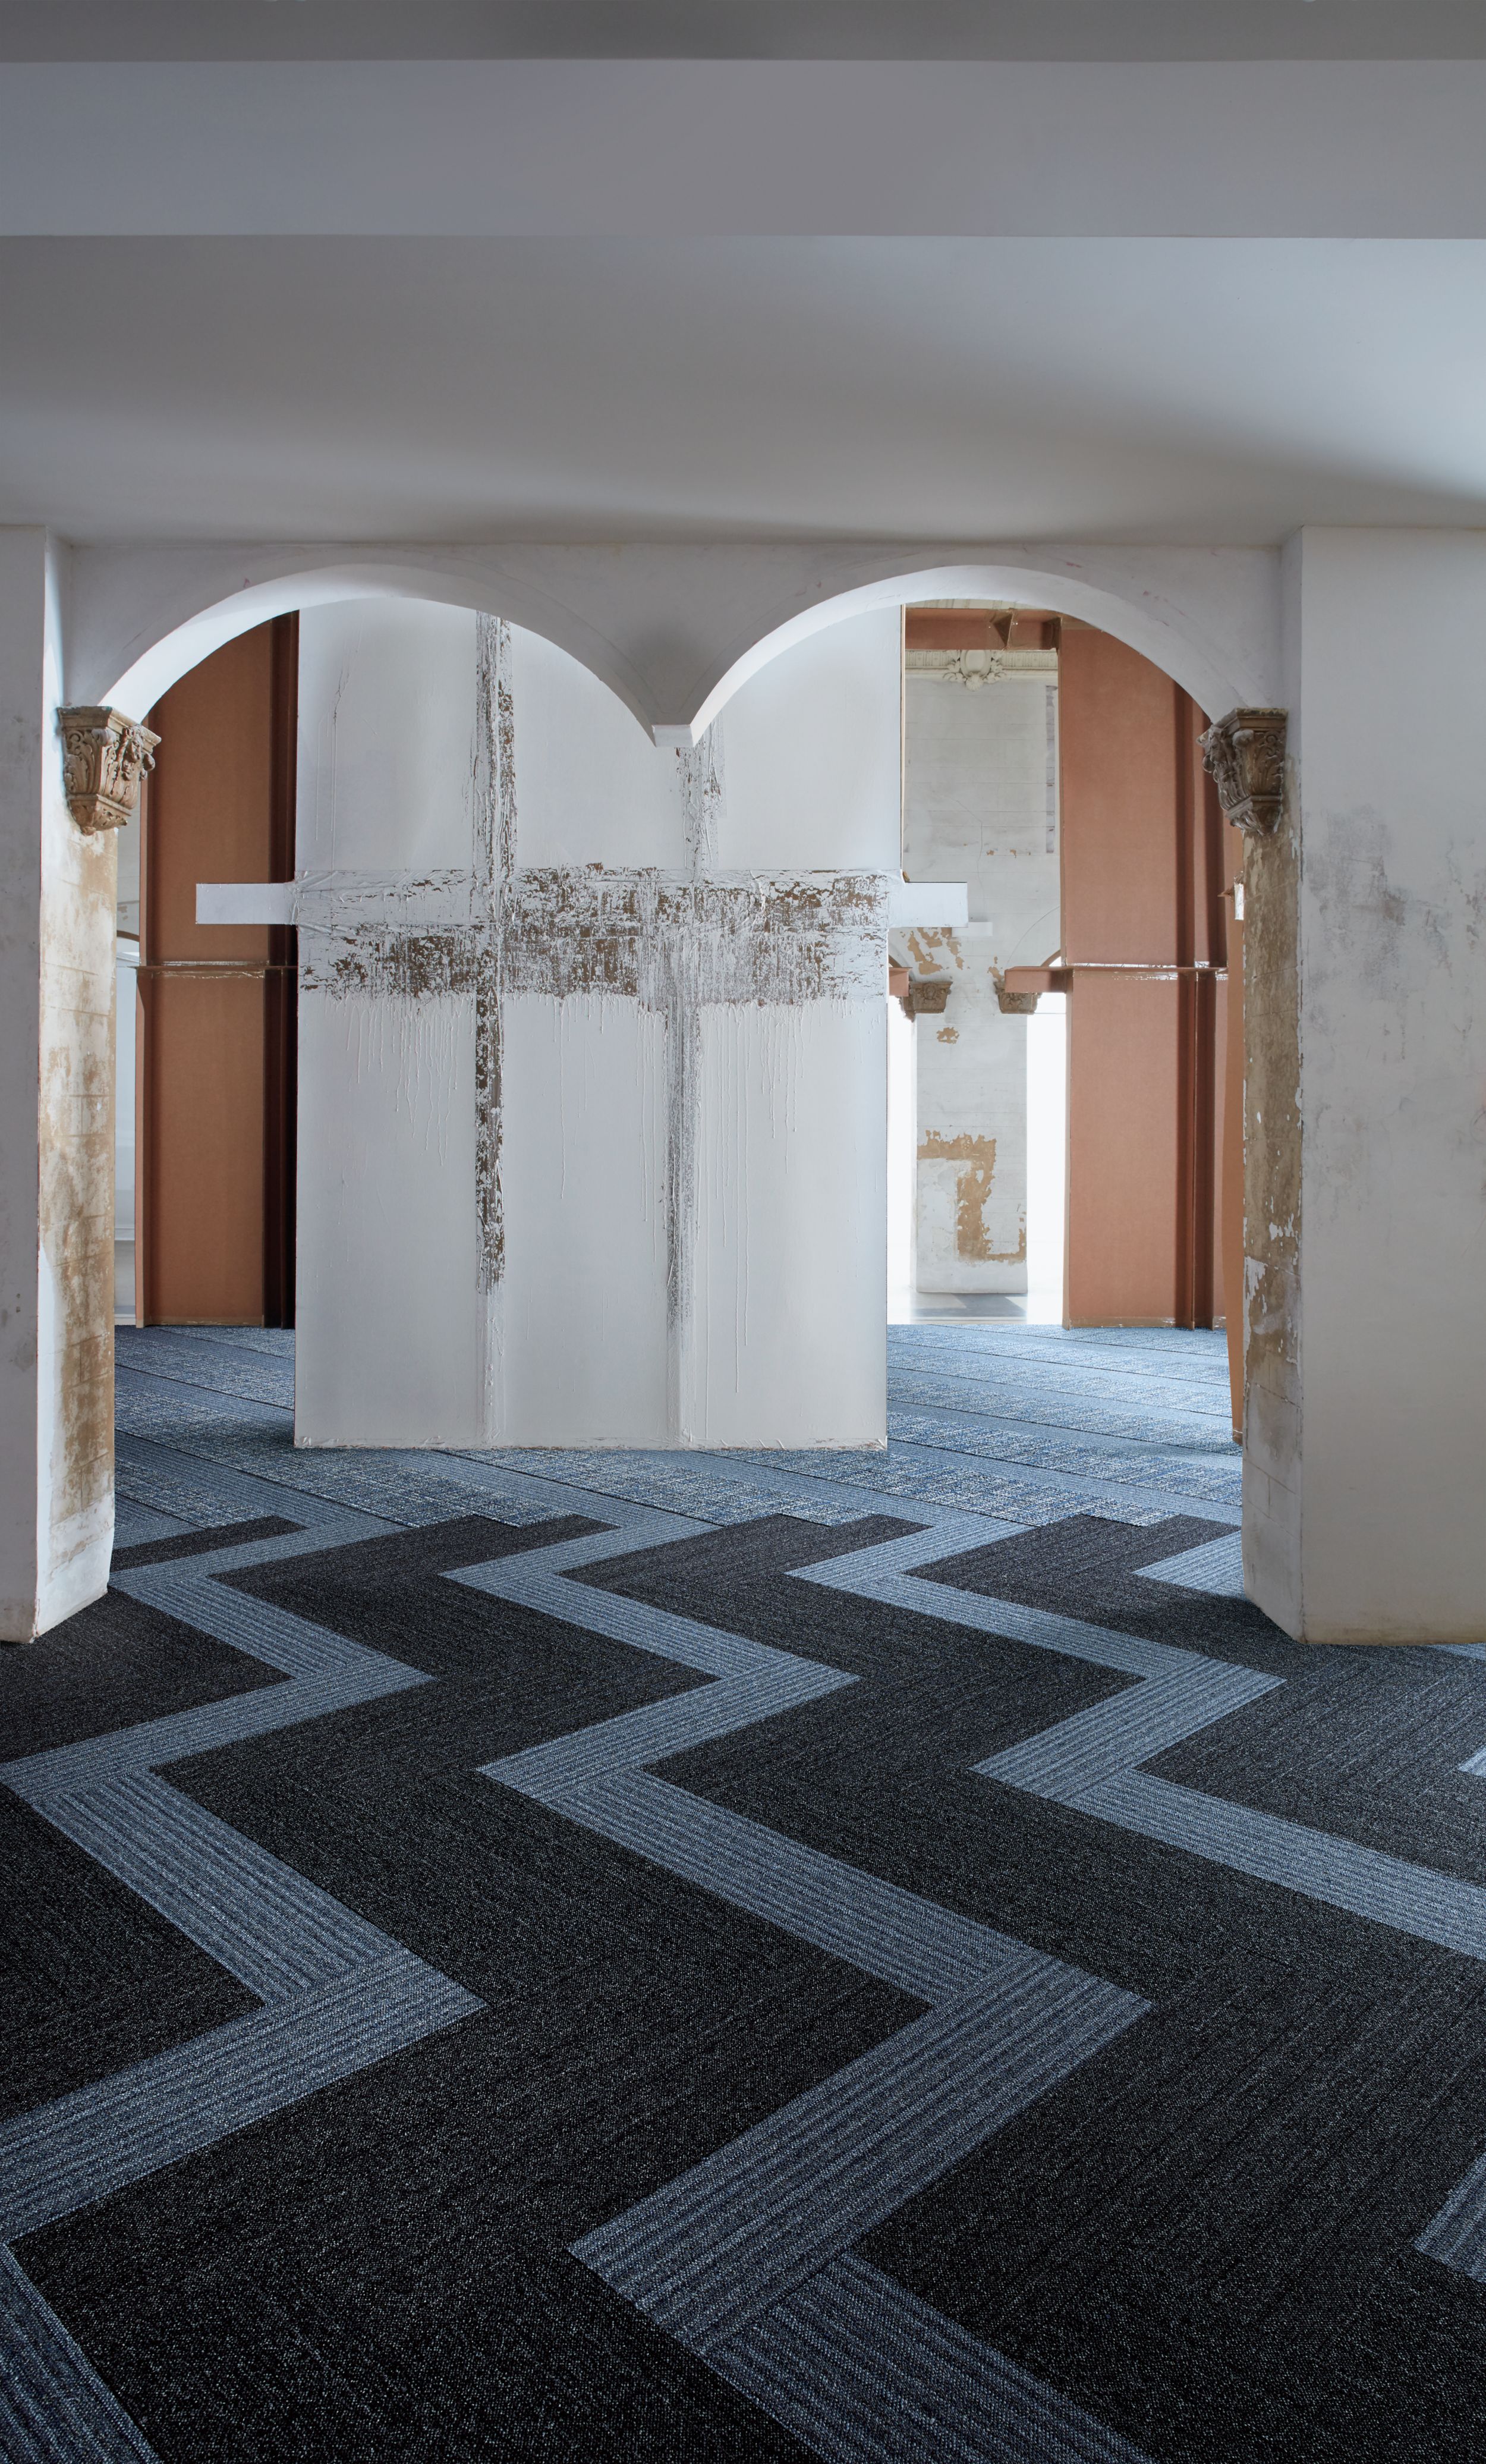 Interface WW865 and WW895 plank carpet tile in lobby setting with archway Bildnummer 10